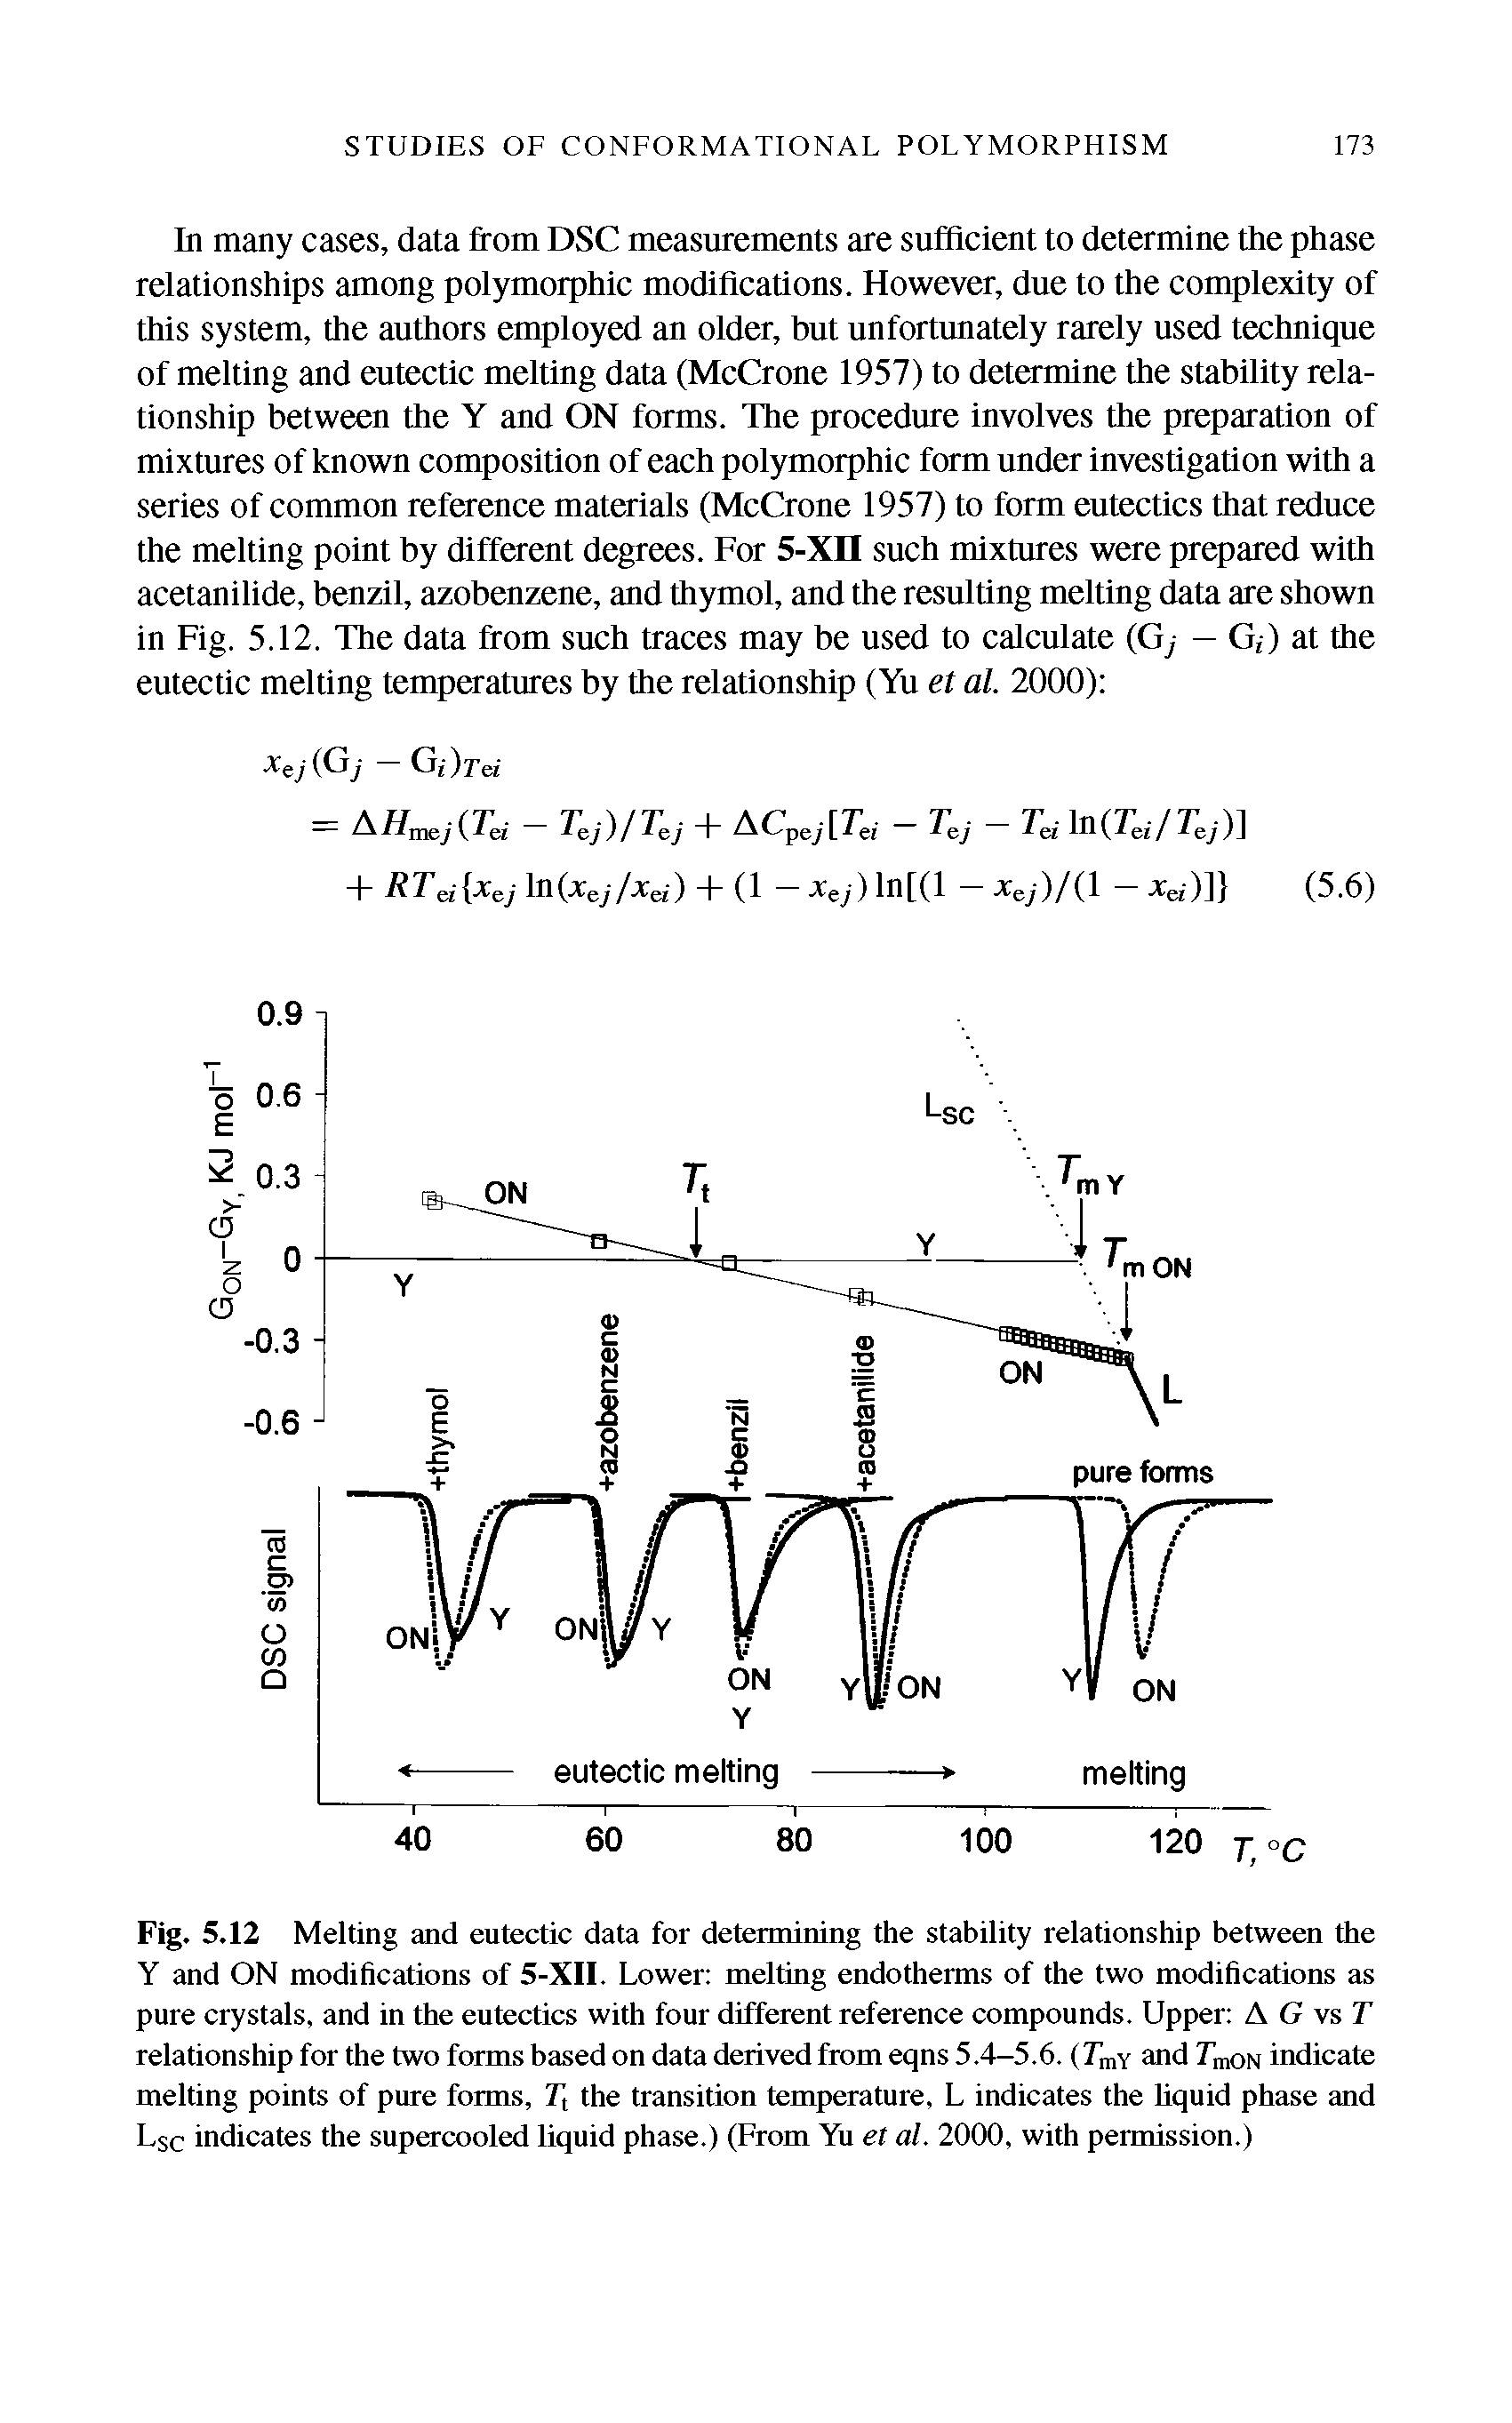 Fig. 5.12 Melting and eutectic data for determining the stability relationship between the Y and ON modifications of 5-XII. Lower melting endotherms of the two modifications as pure crystals, and in the eutectics with four different reference compounds. Upper A G sT relationship for the two forms based on data derived from eqns 5.4—5.6. (T y and TmON indicate melting points of pure forms, Ti the transition temperature, L indicates the liquid phase and Lsc indicates the supercooled liquid phase.) (From Yu et al. 2000, with permission.)...